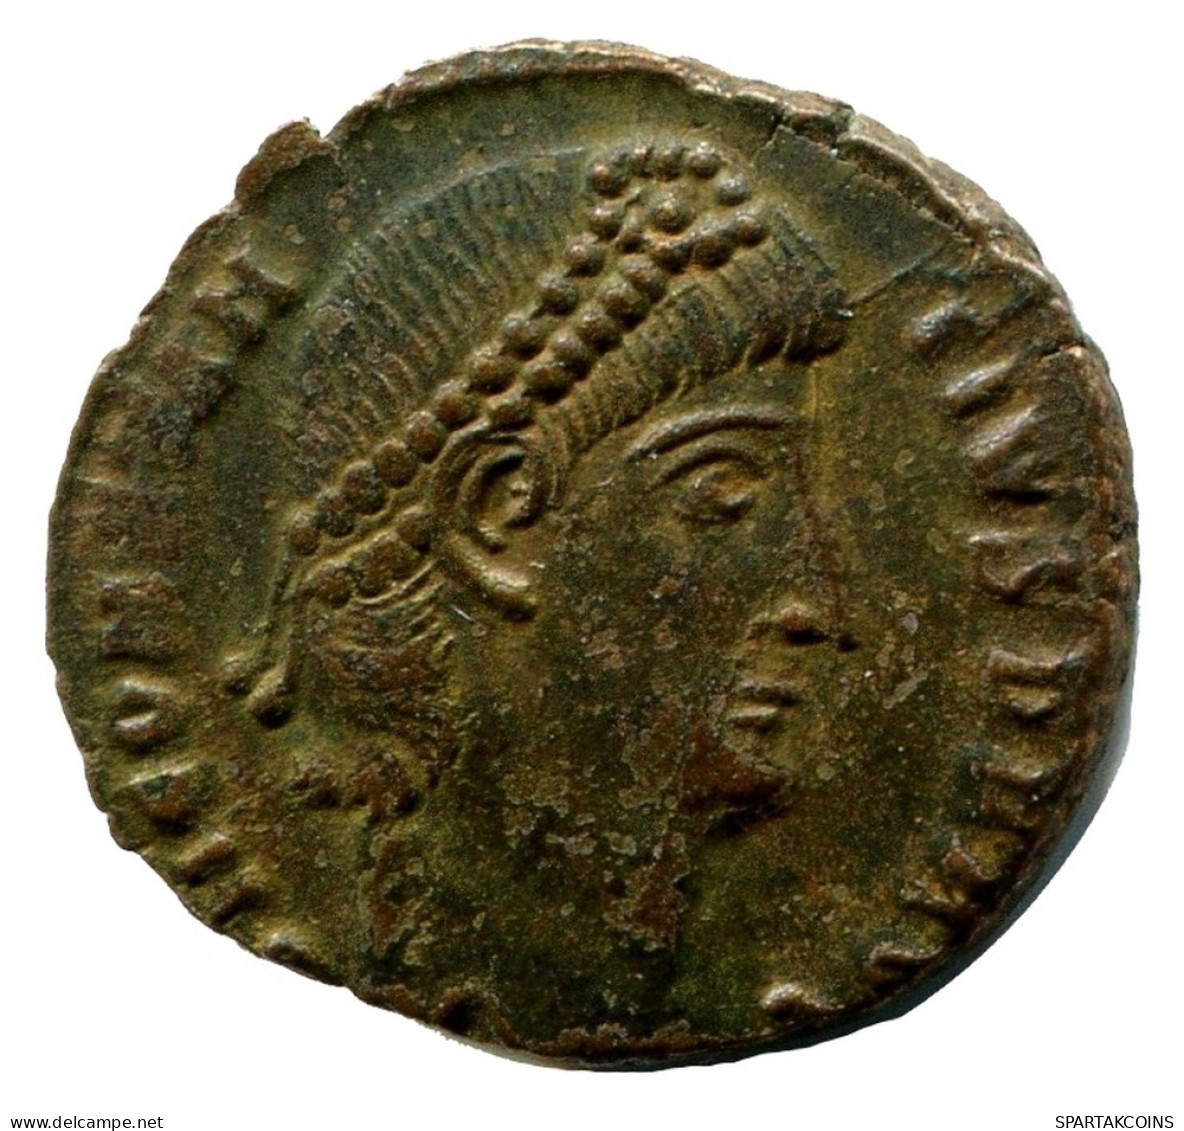 CONSTANTIUS II MINTED IN ANTIOCH FOUND IN IHNASYAH HOARD EGYPT #ANC11228.14.D.A - L'Empire Chrétien (307 à 363)